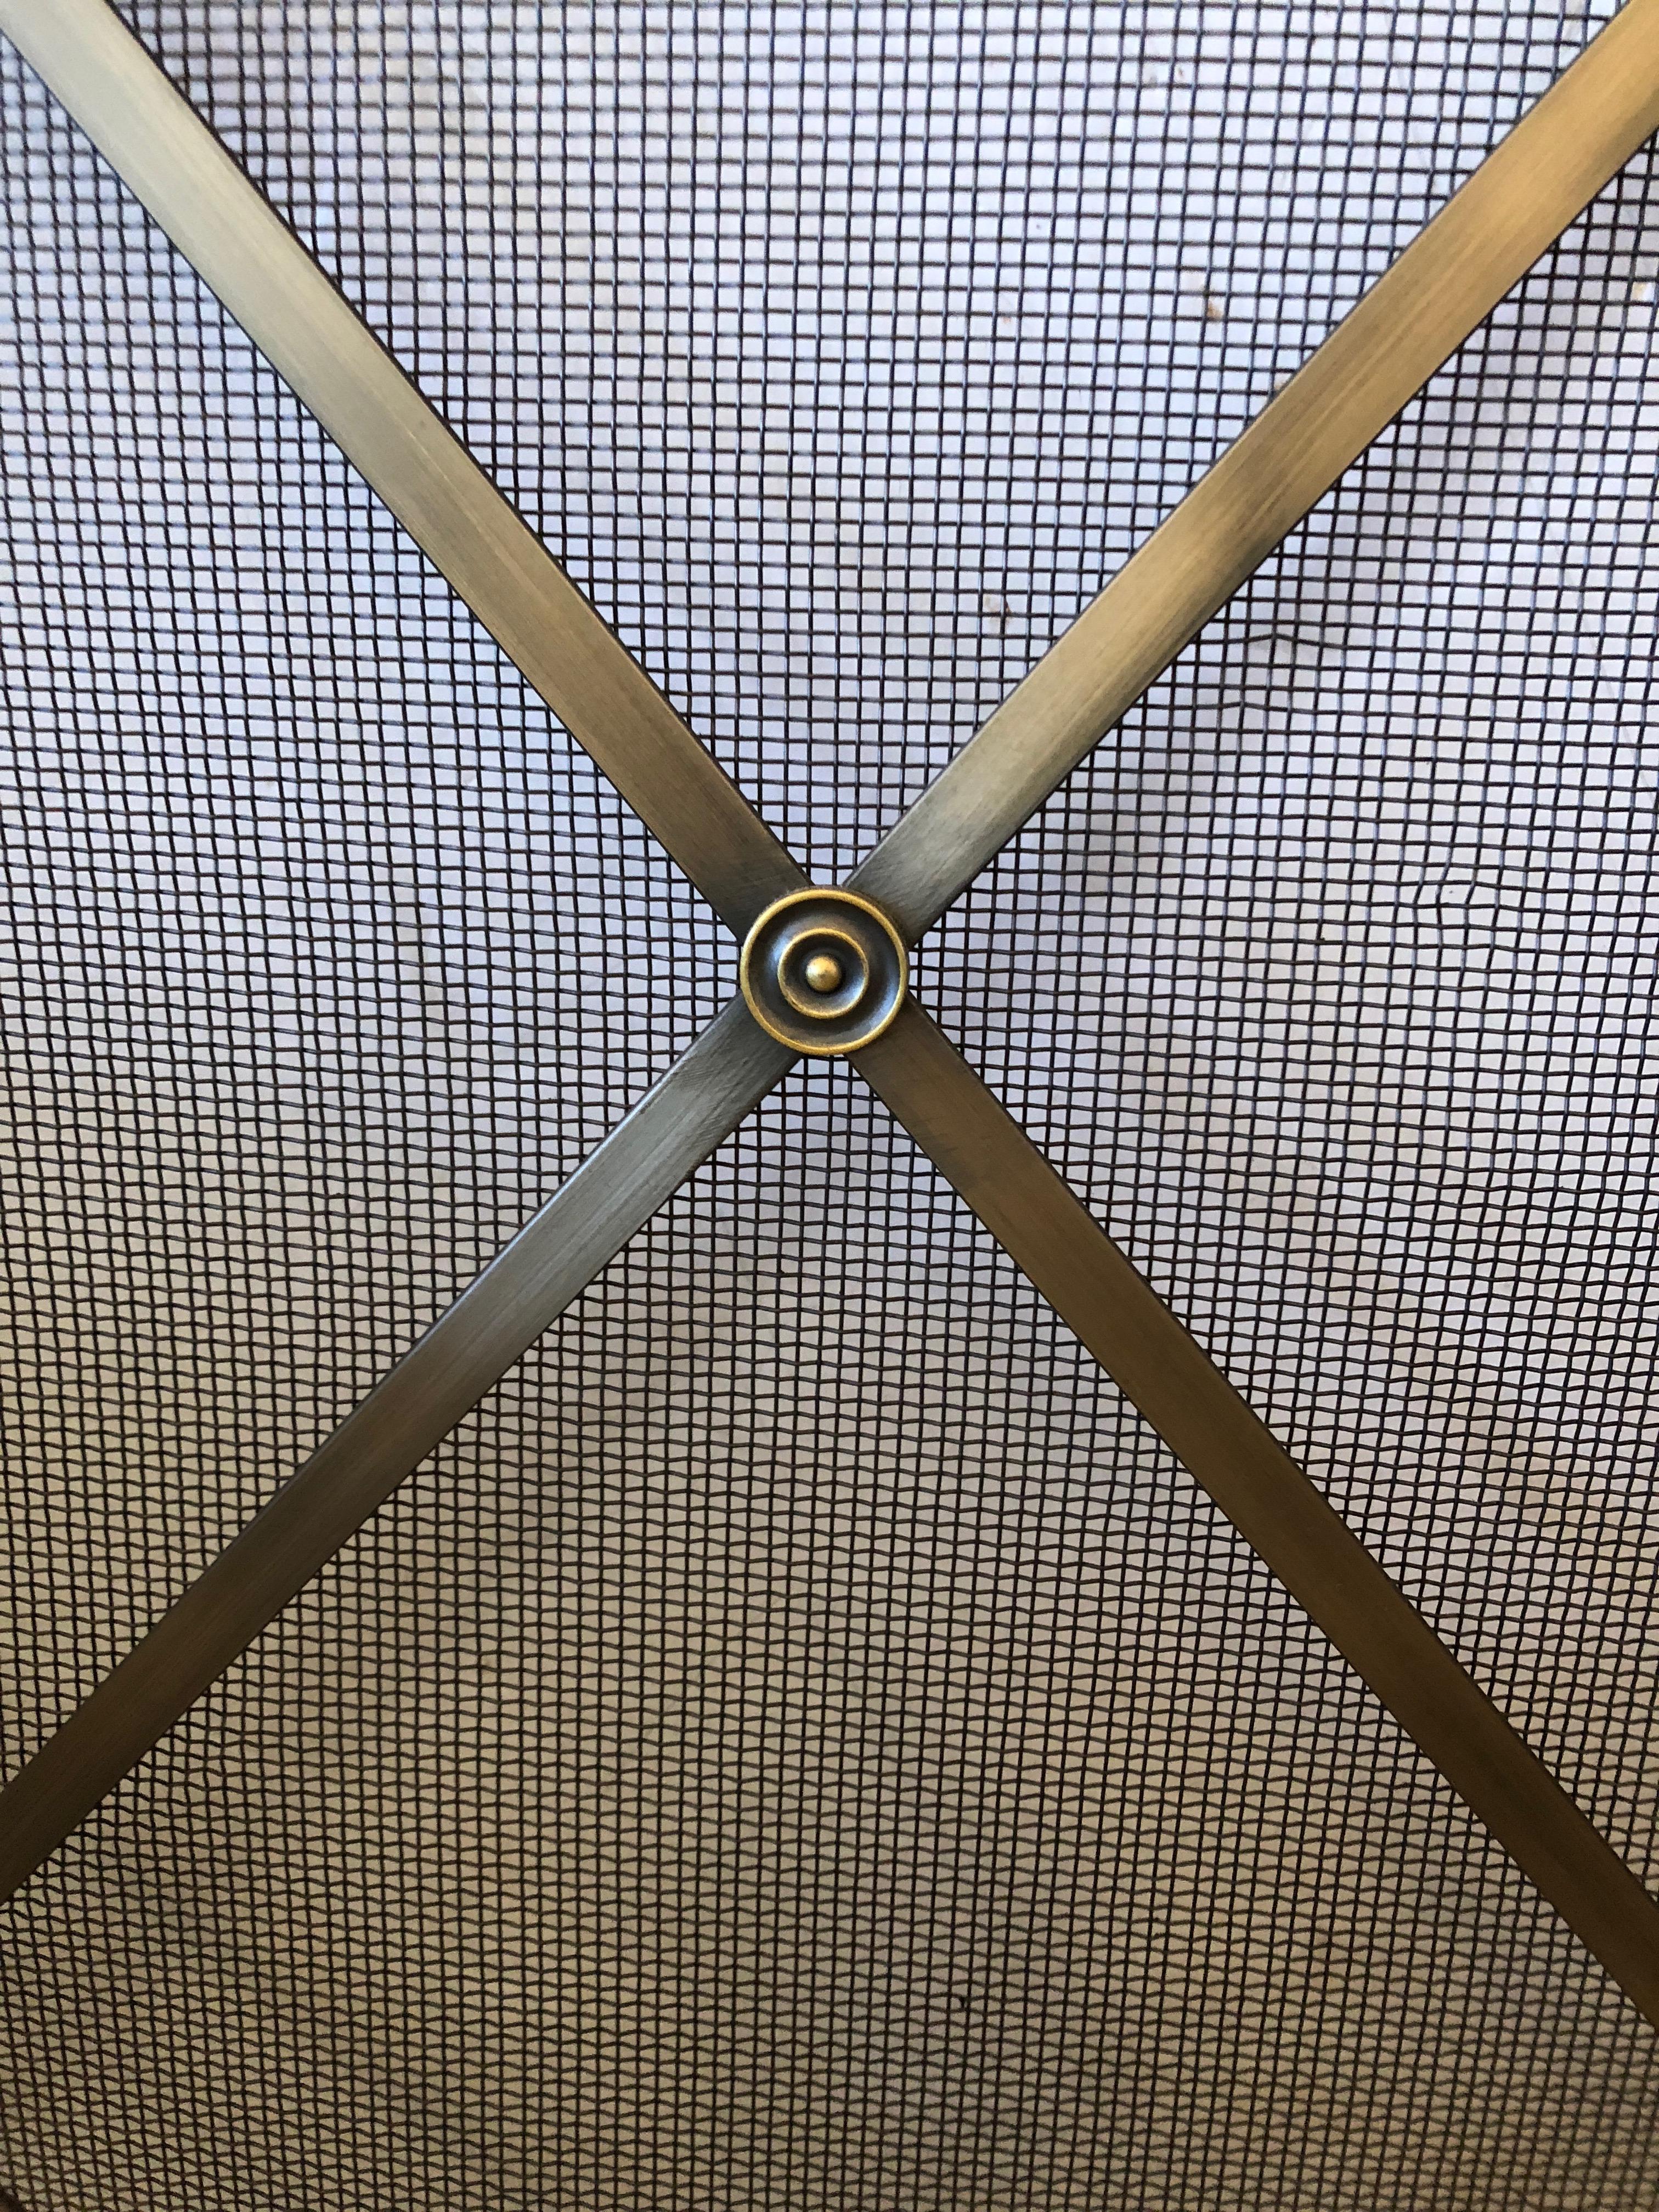 Beautiful brass and iron mesh mid-century modern fireplace screen in bronzey gold color, having the criss cross pattern in the manner of Jean Royère.